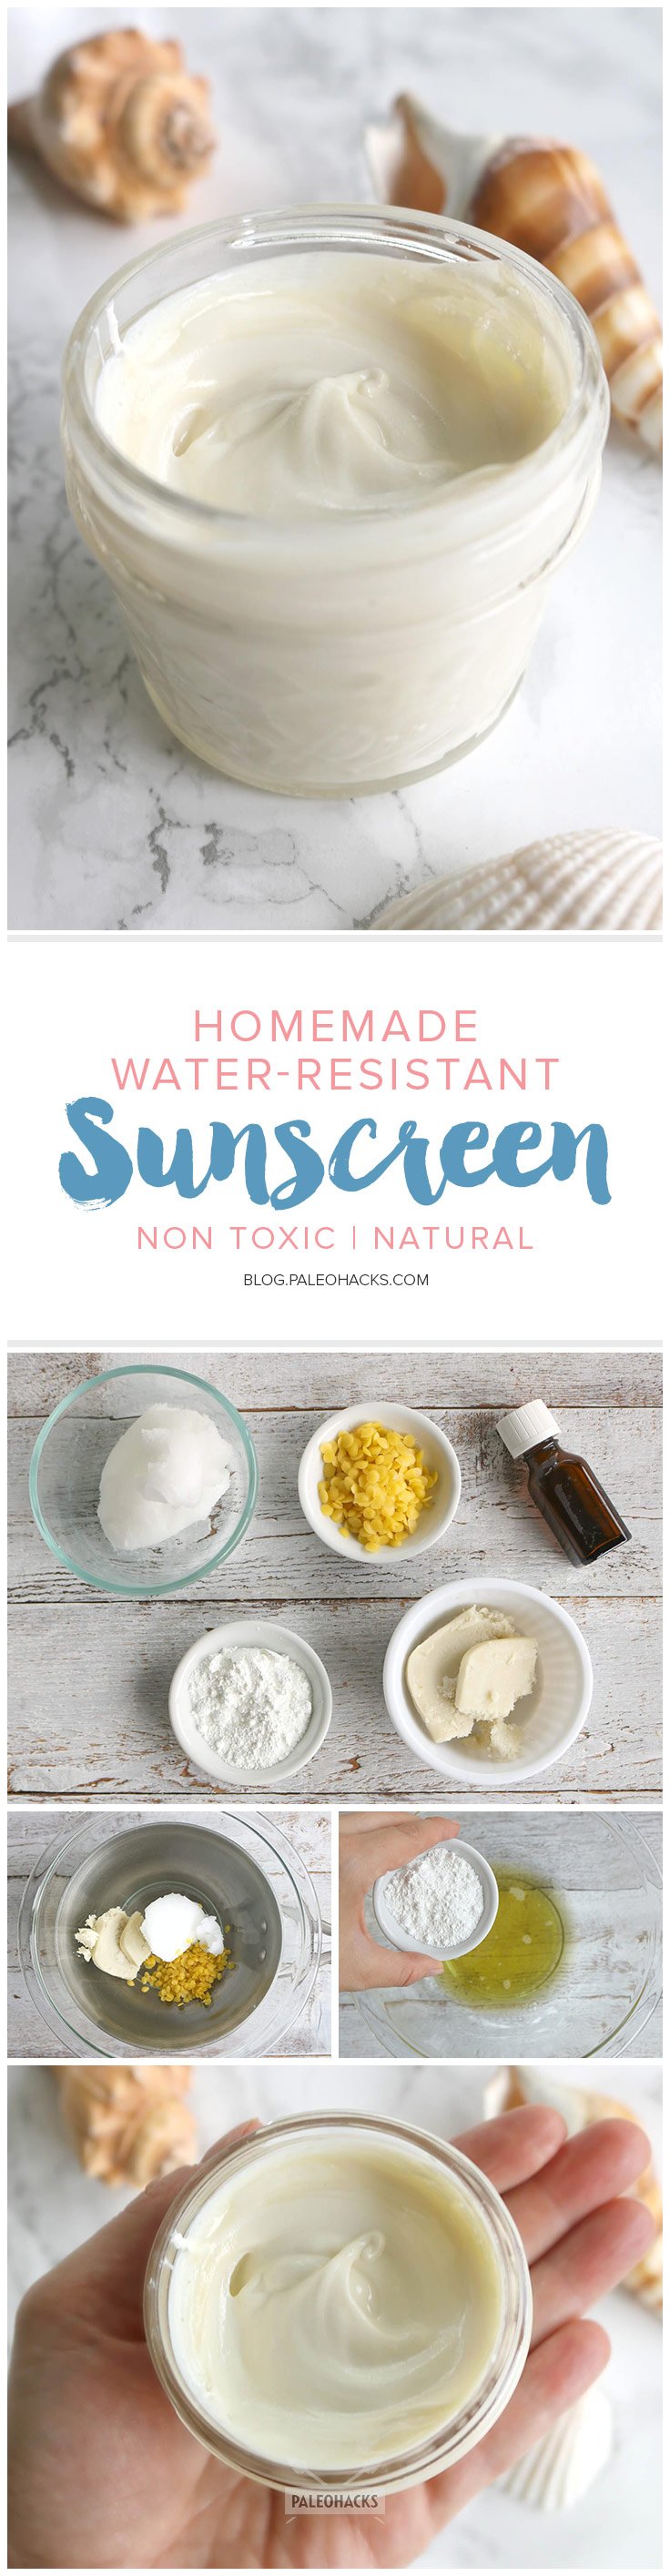 This whipped sunscreen moisturizes skin while protecting it from the sun by using the natural SPF in zinc oxide for a chemical-free sunscreen.